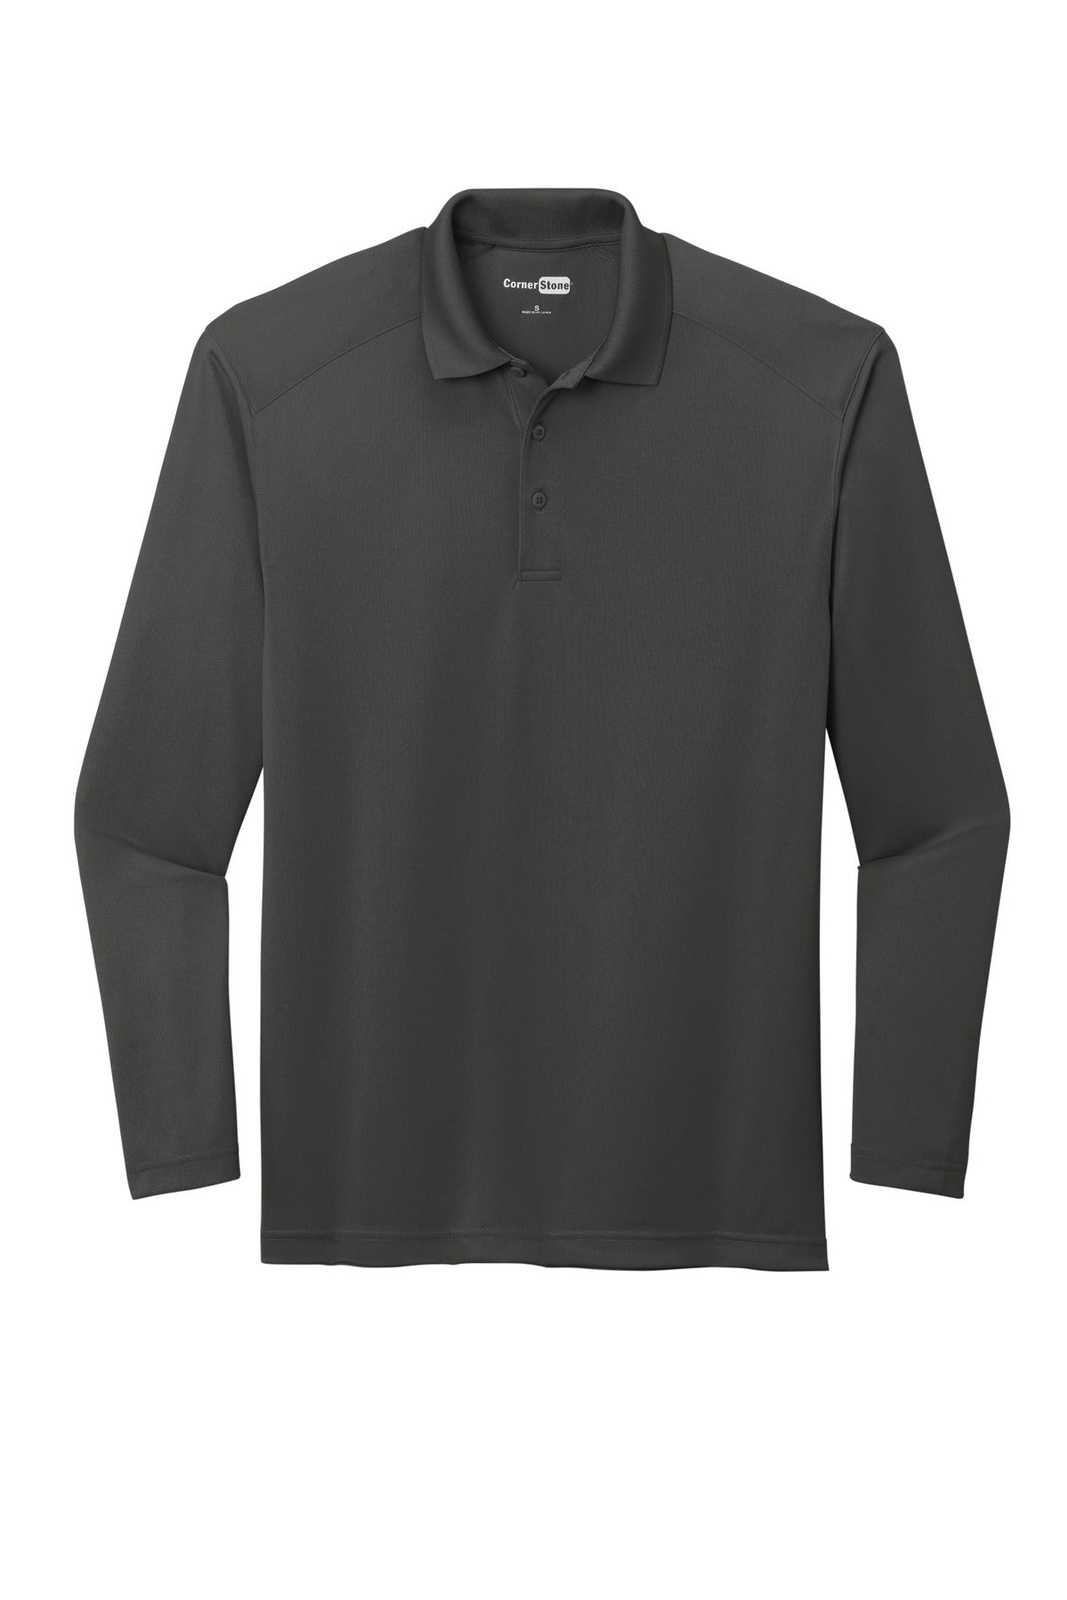 CornerStone CS418LS Select Lightweight Snag-Proof Long Sleeve Polo - Charcoal - HIT a Double - 2